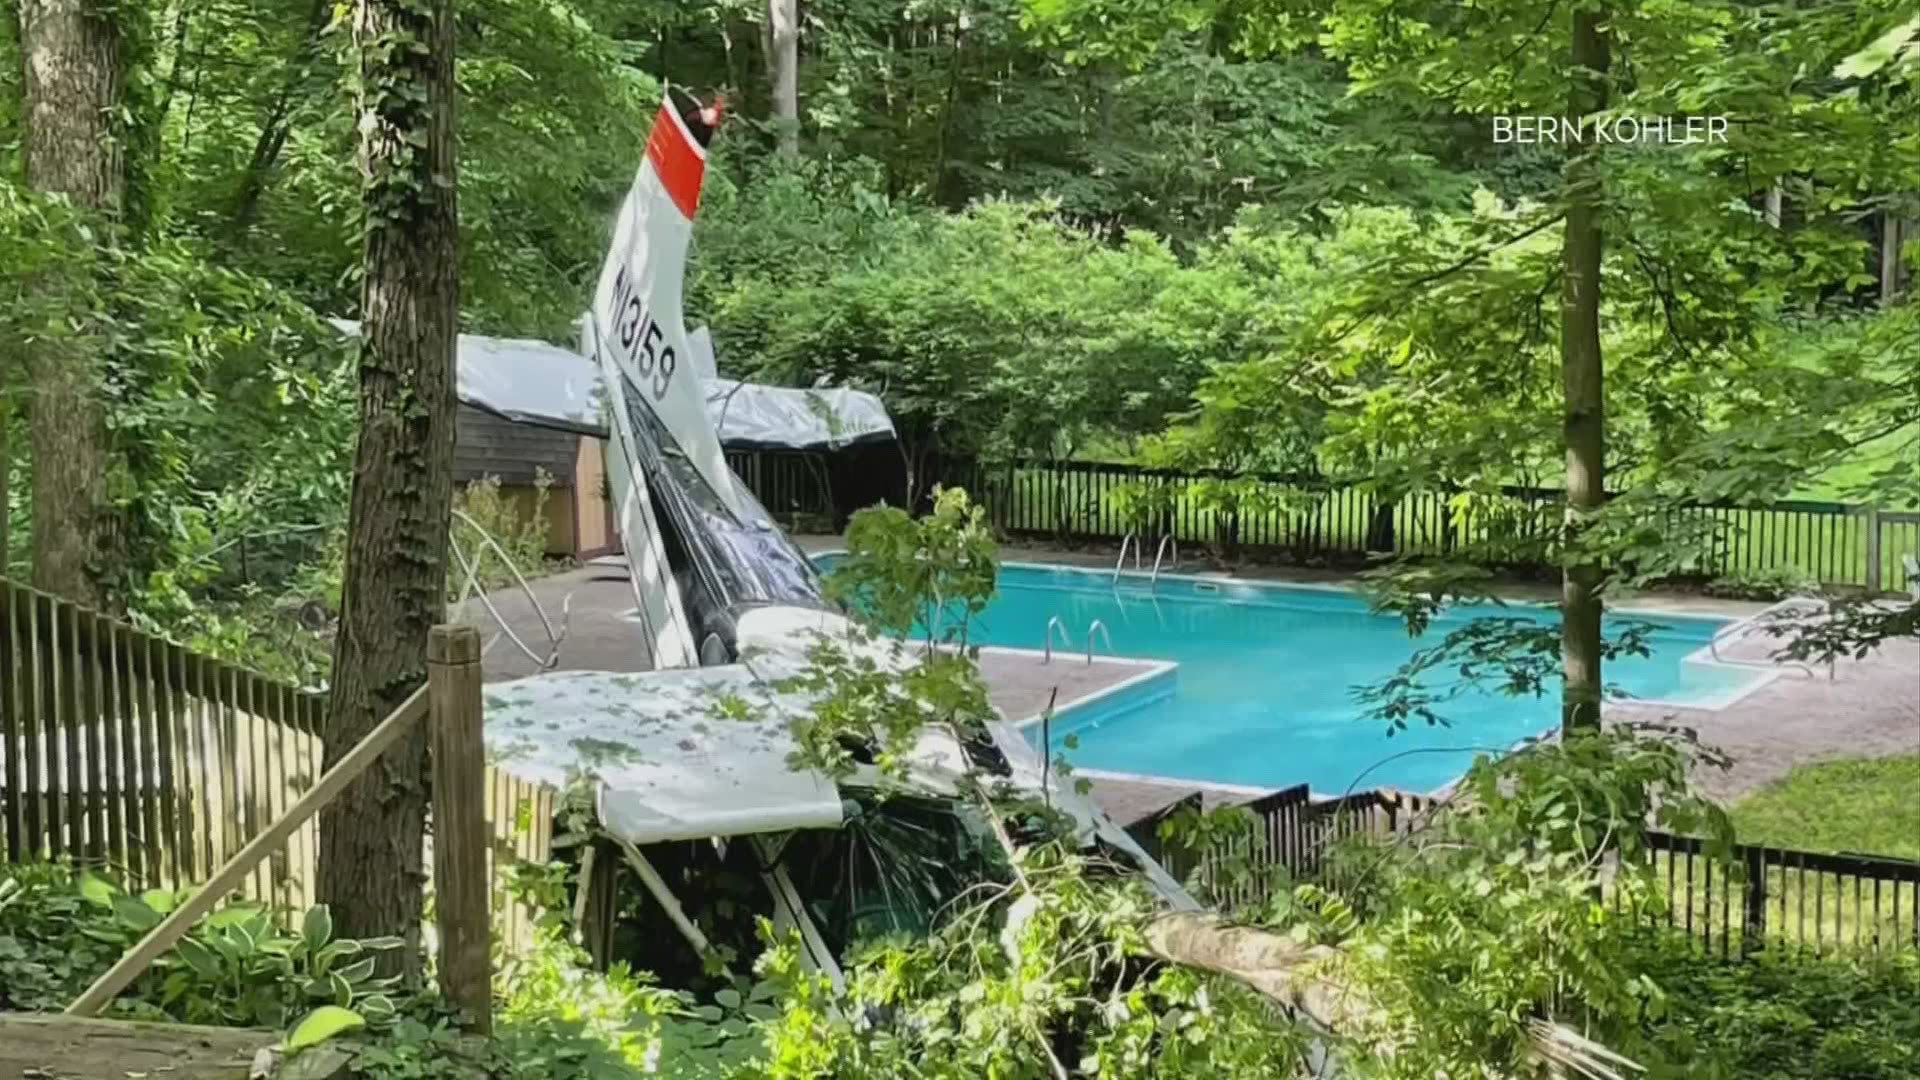 Authorities are continuing to investigate after a plane crashed in the backyard of a Worthington neighborhood Monday morning.